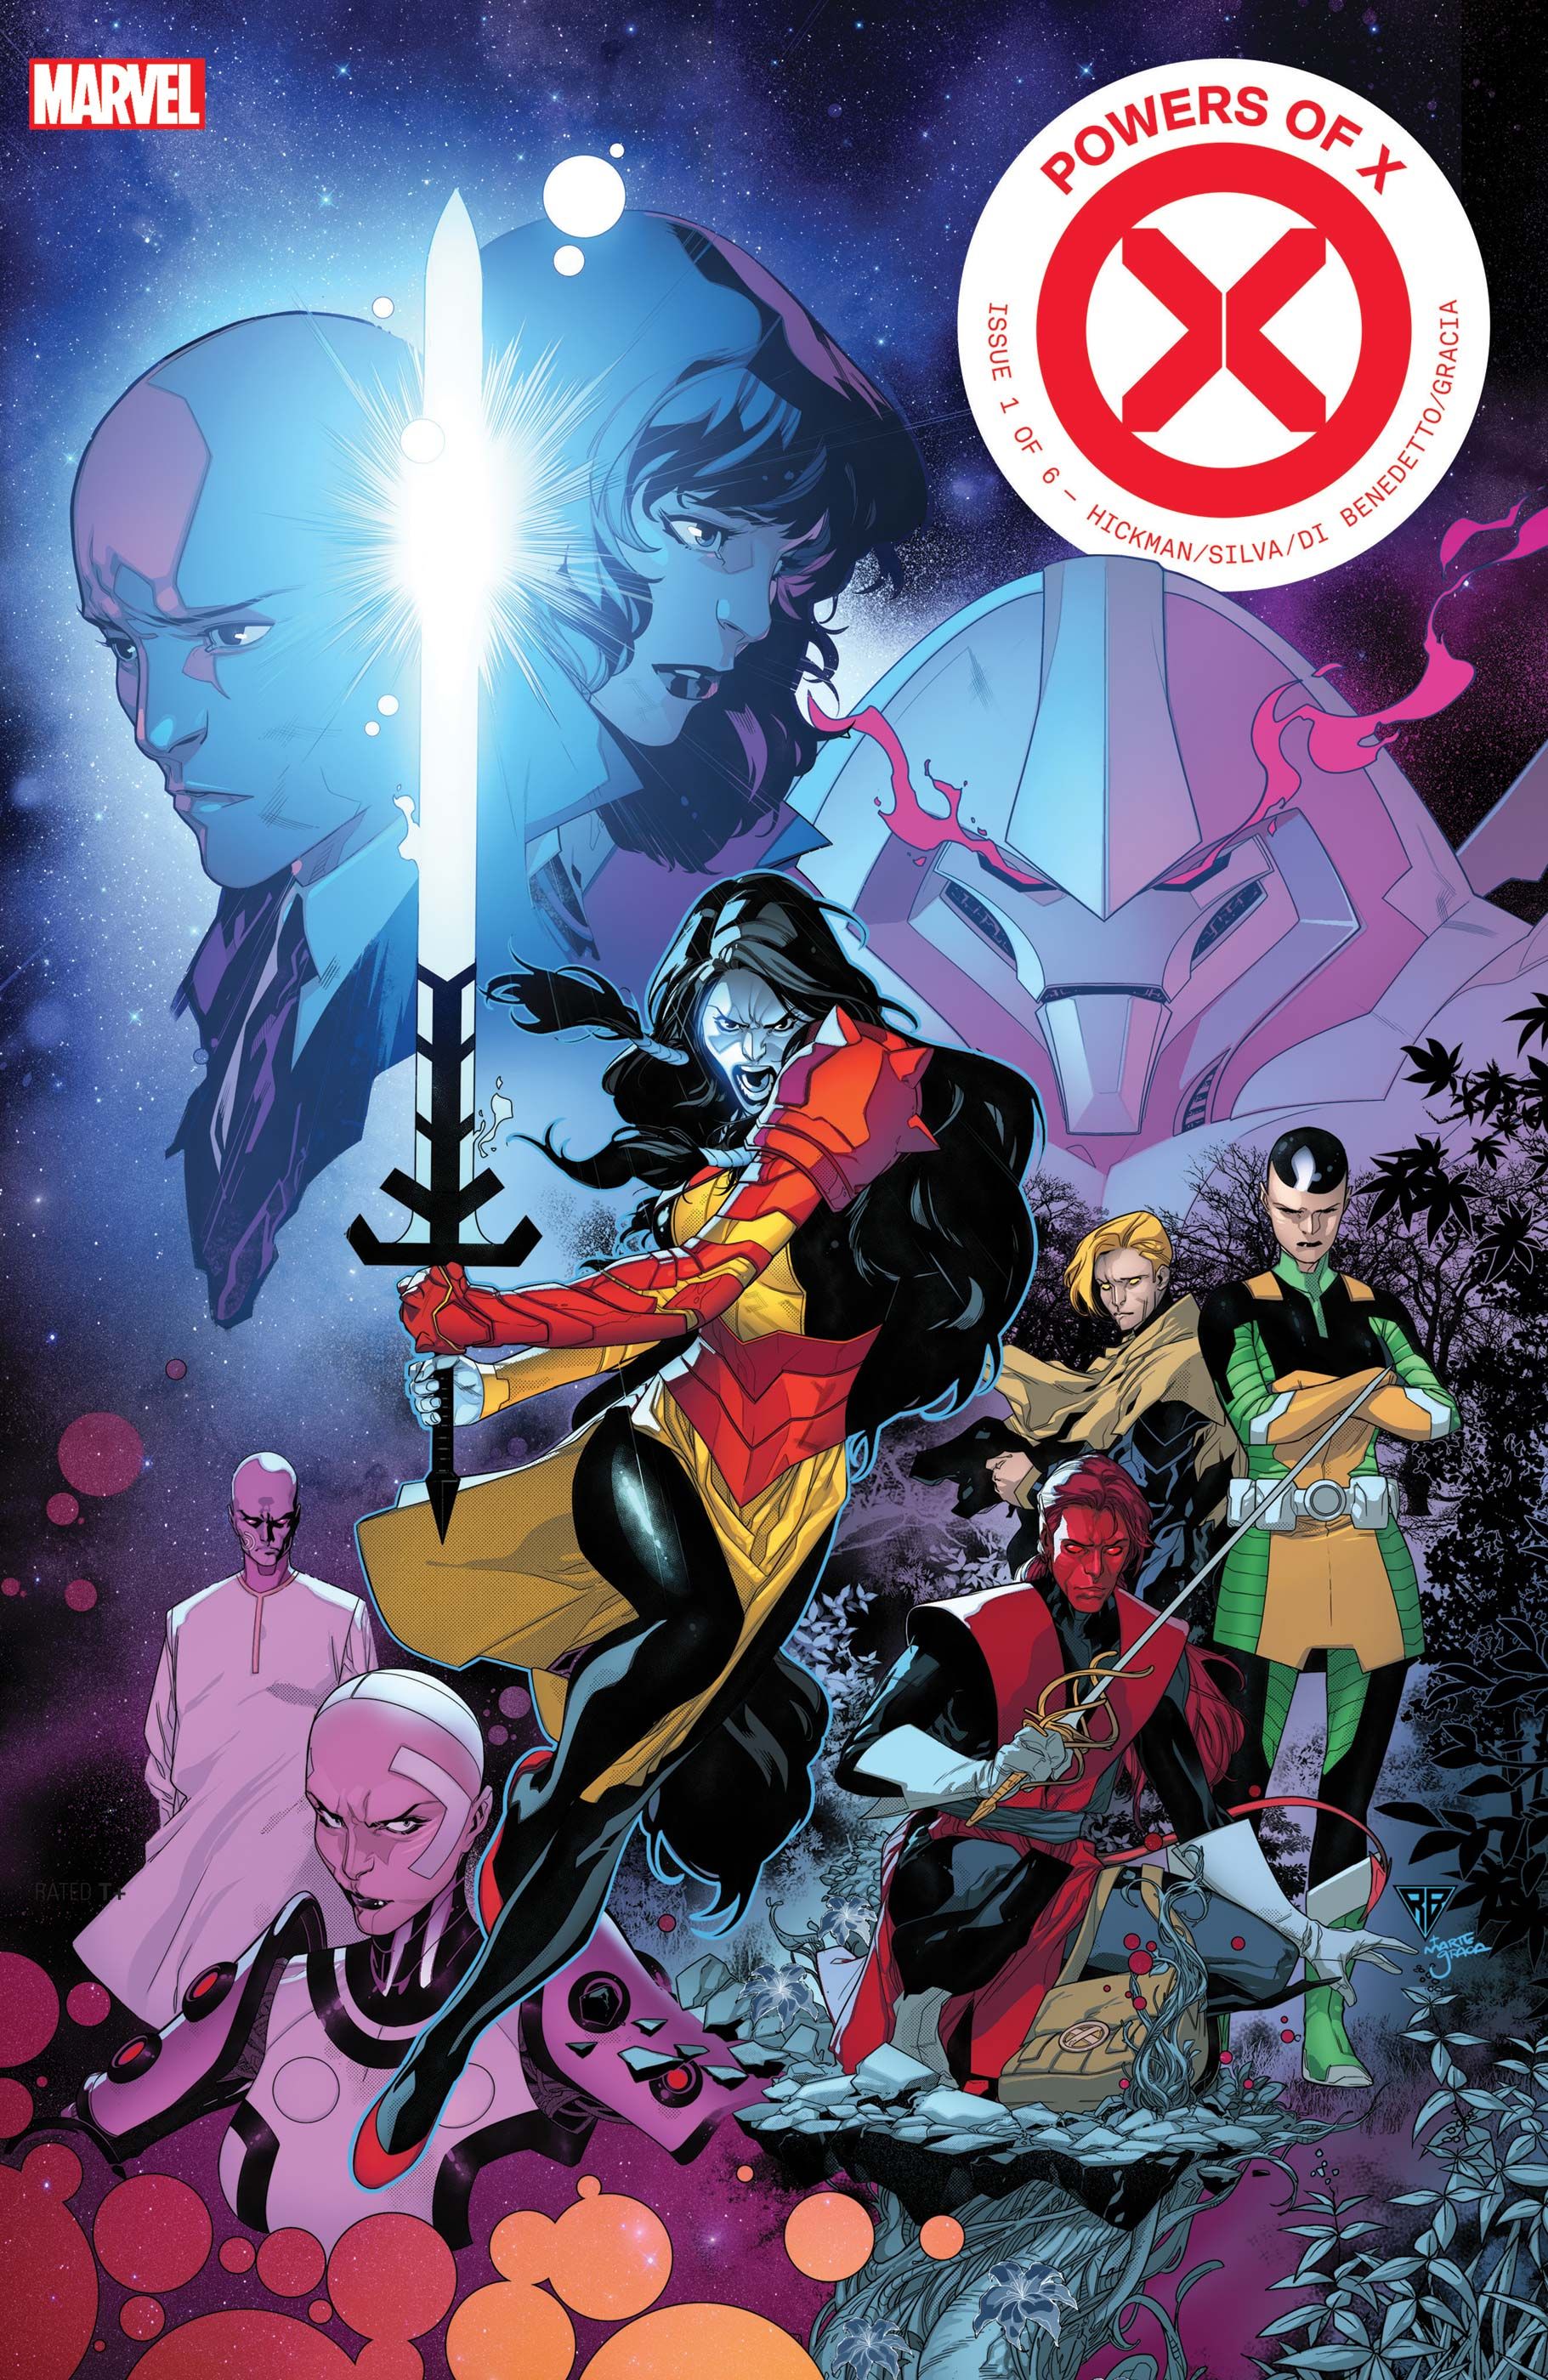 R.B. Silva and Marte Gracia's cover to Powers of X #1, featuring the newly introduced mutant character Rasputin IV